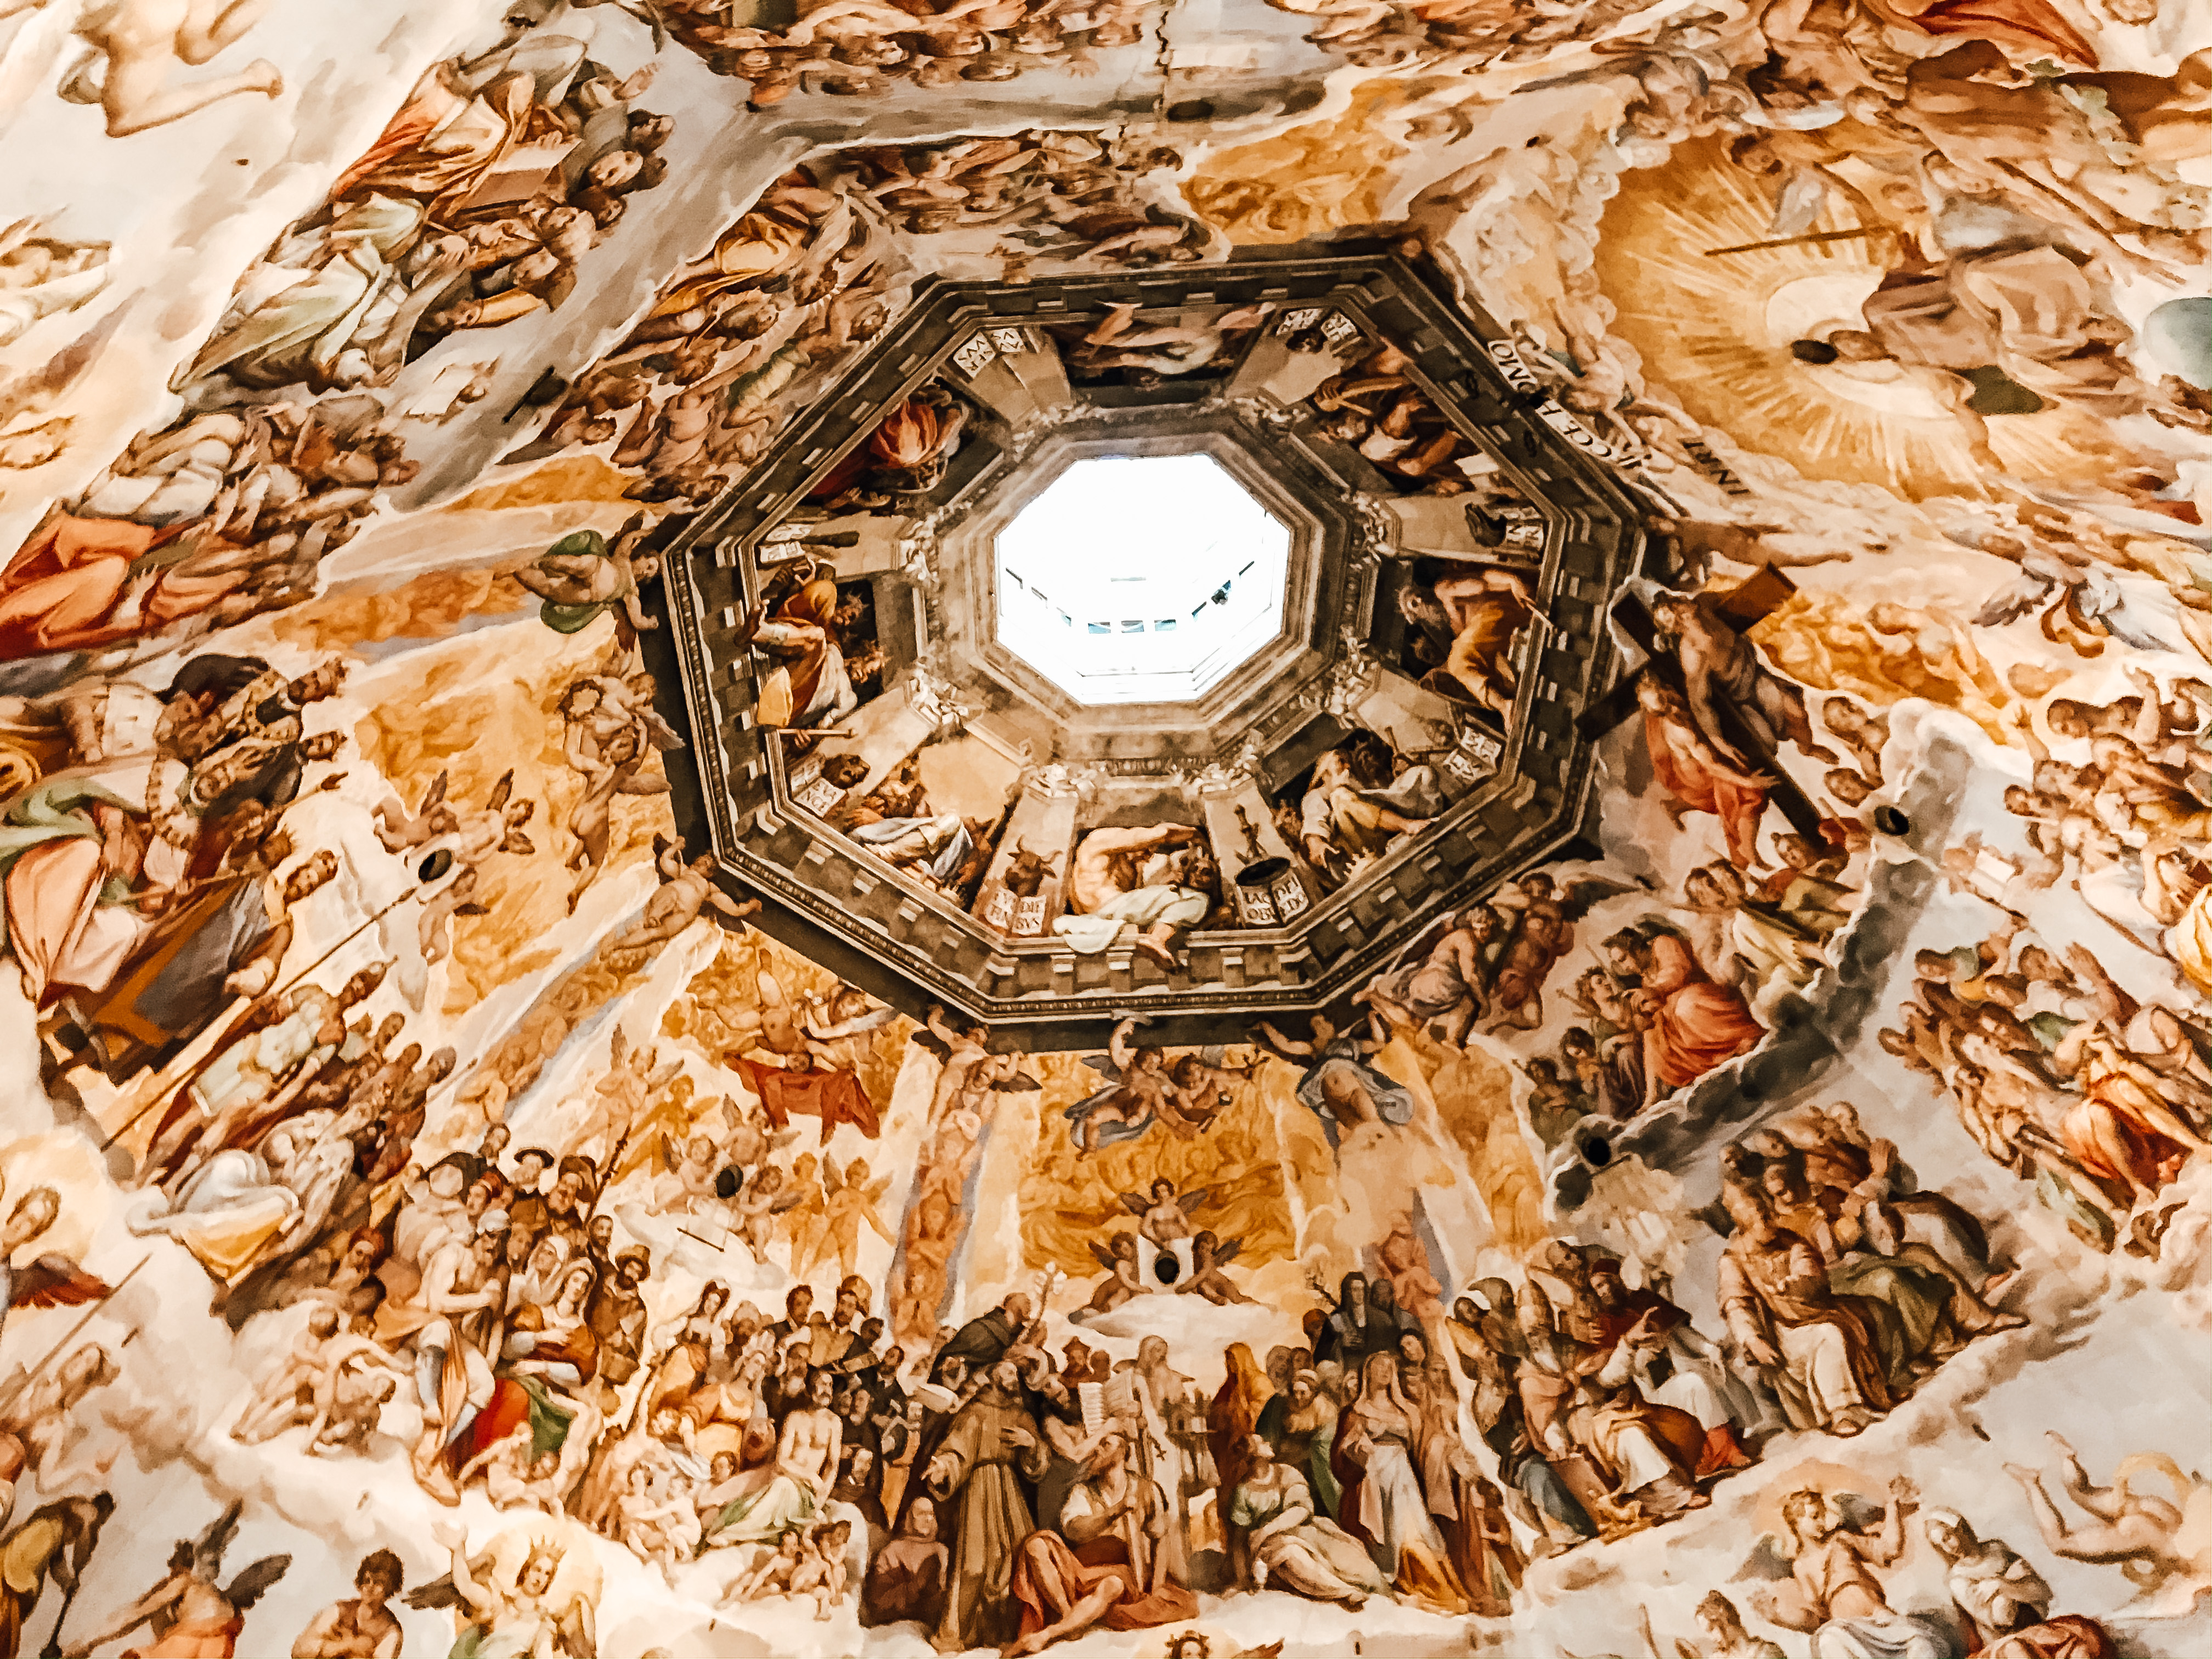 Fresco of the Last Judgement by Giorgio Vasari and Federico Zuccari inside the Dome of Florence, Italy.